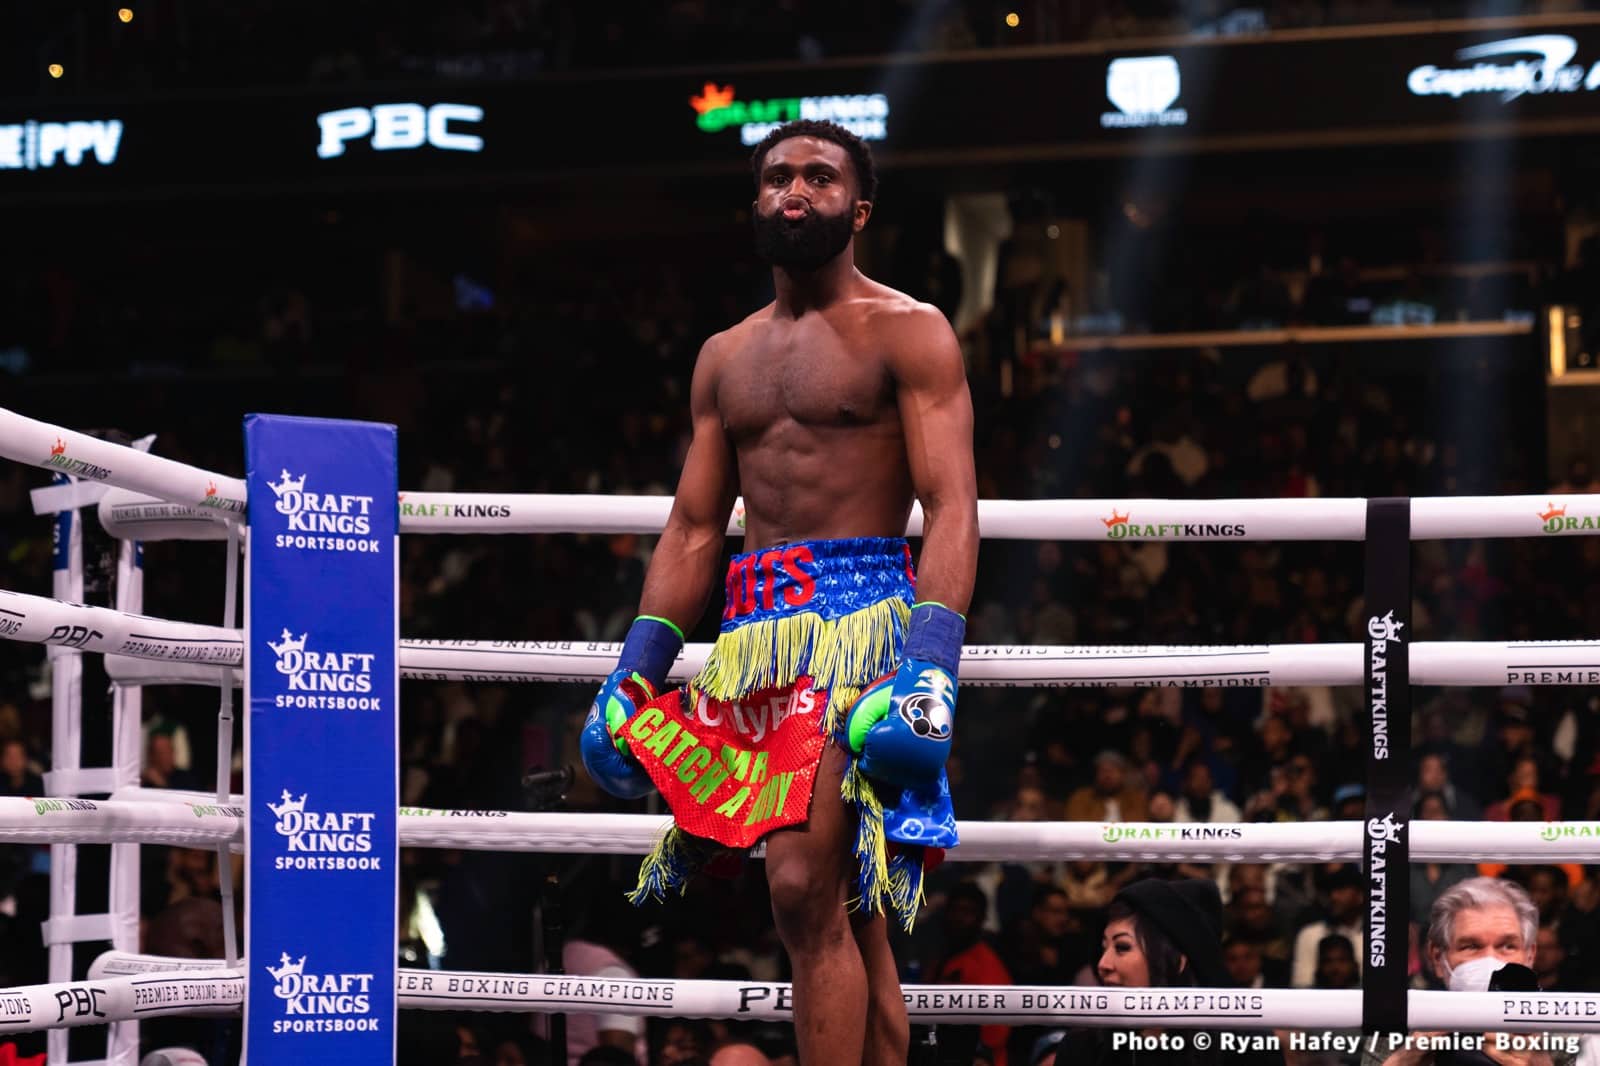 Image: Results / Photos: Jaron Ennis Wins - “Everyone knows I want Spence”